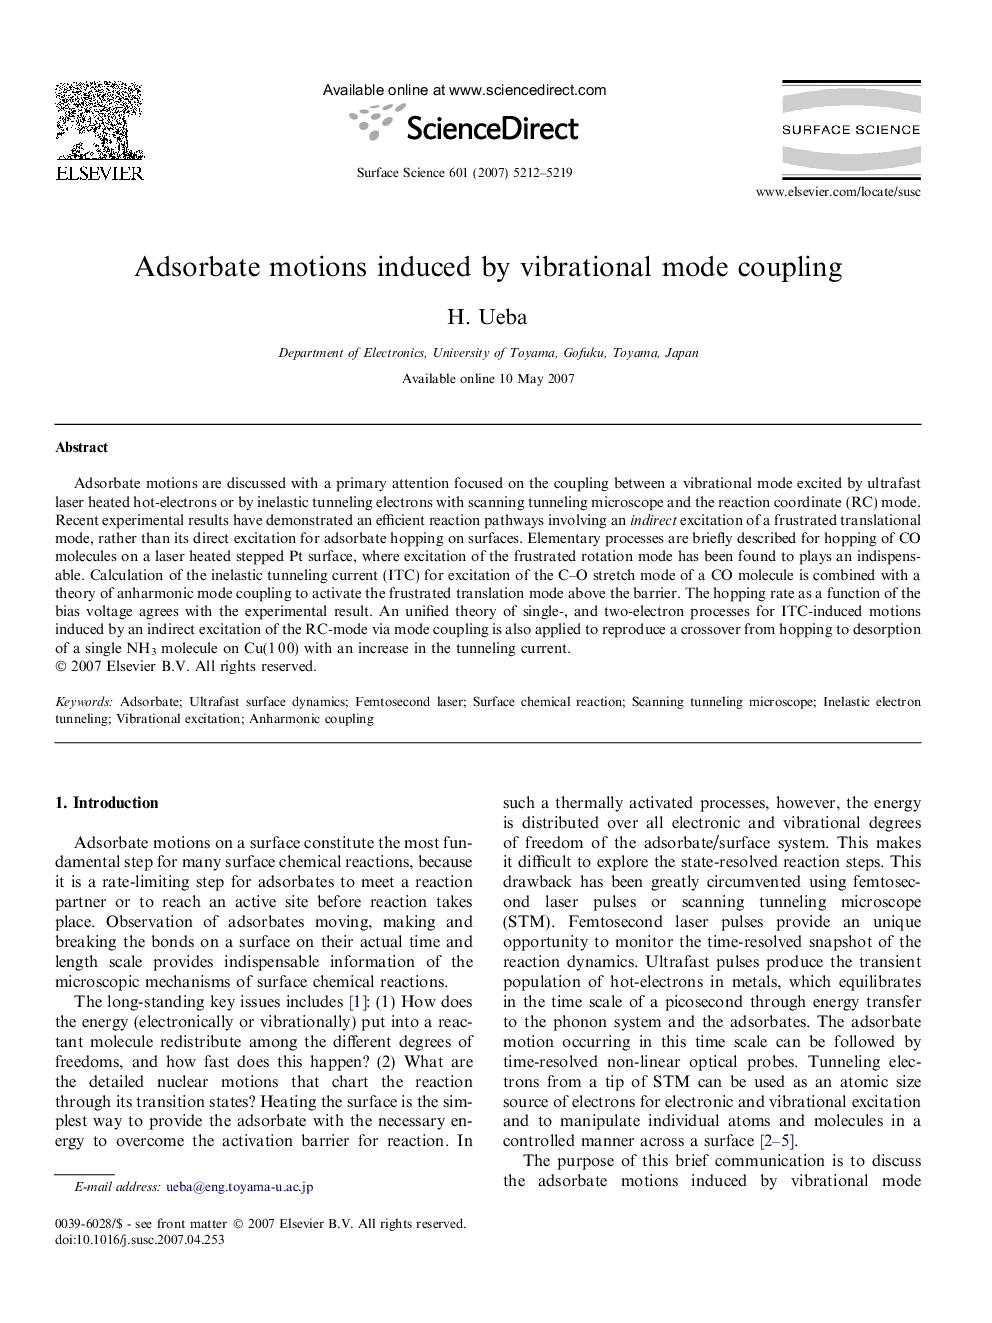 Adsorbate motions induced by vibrational mode coupling